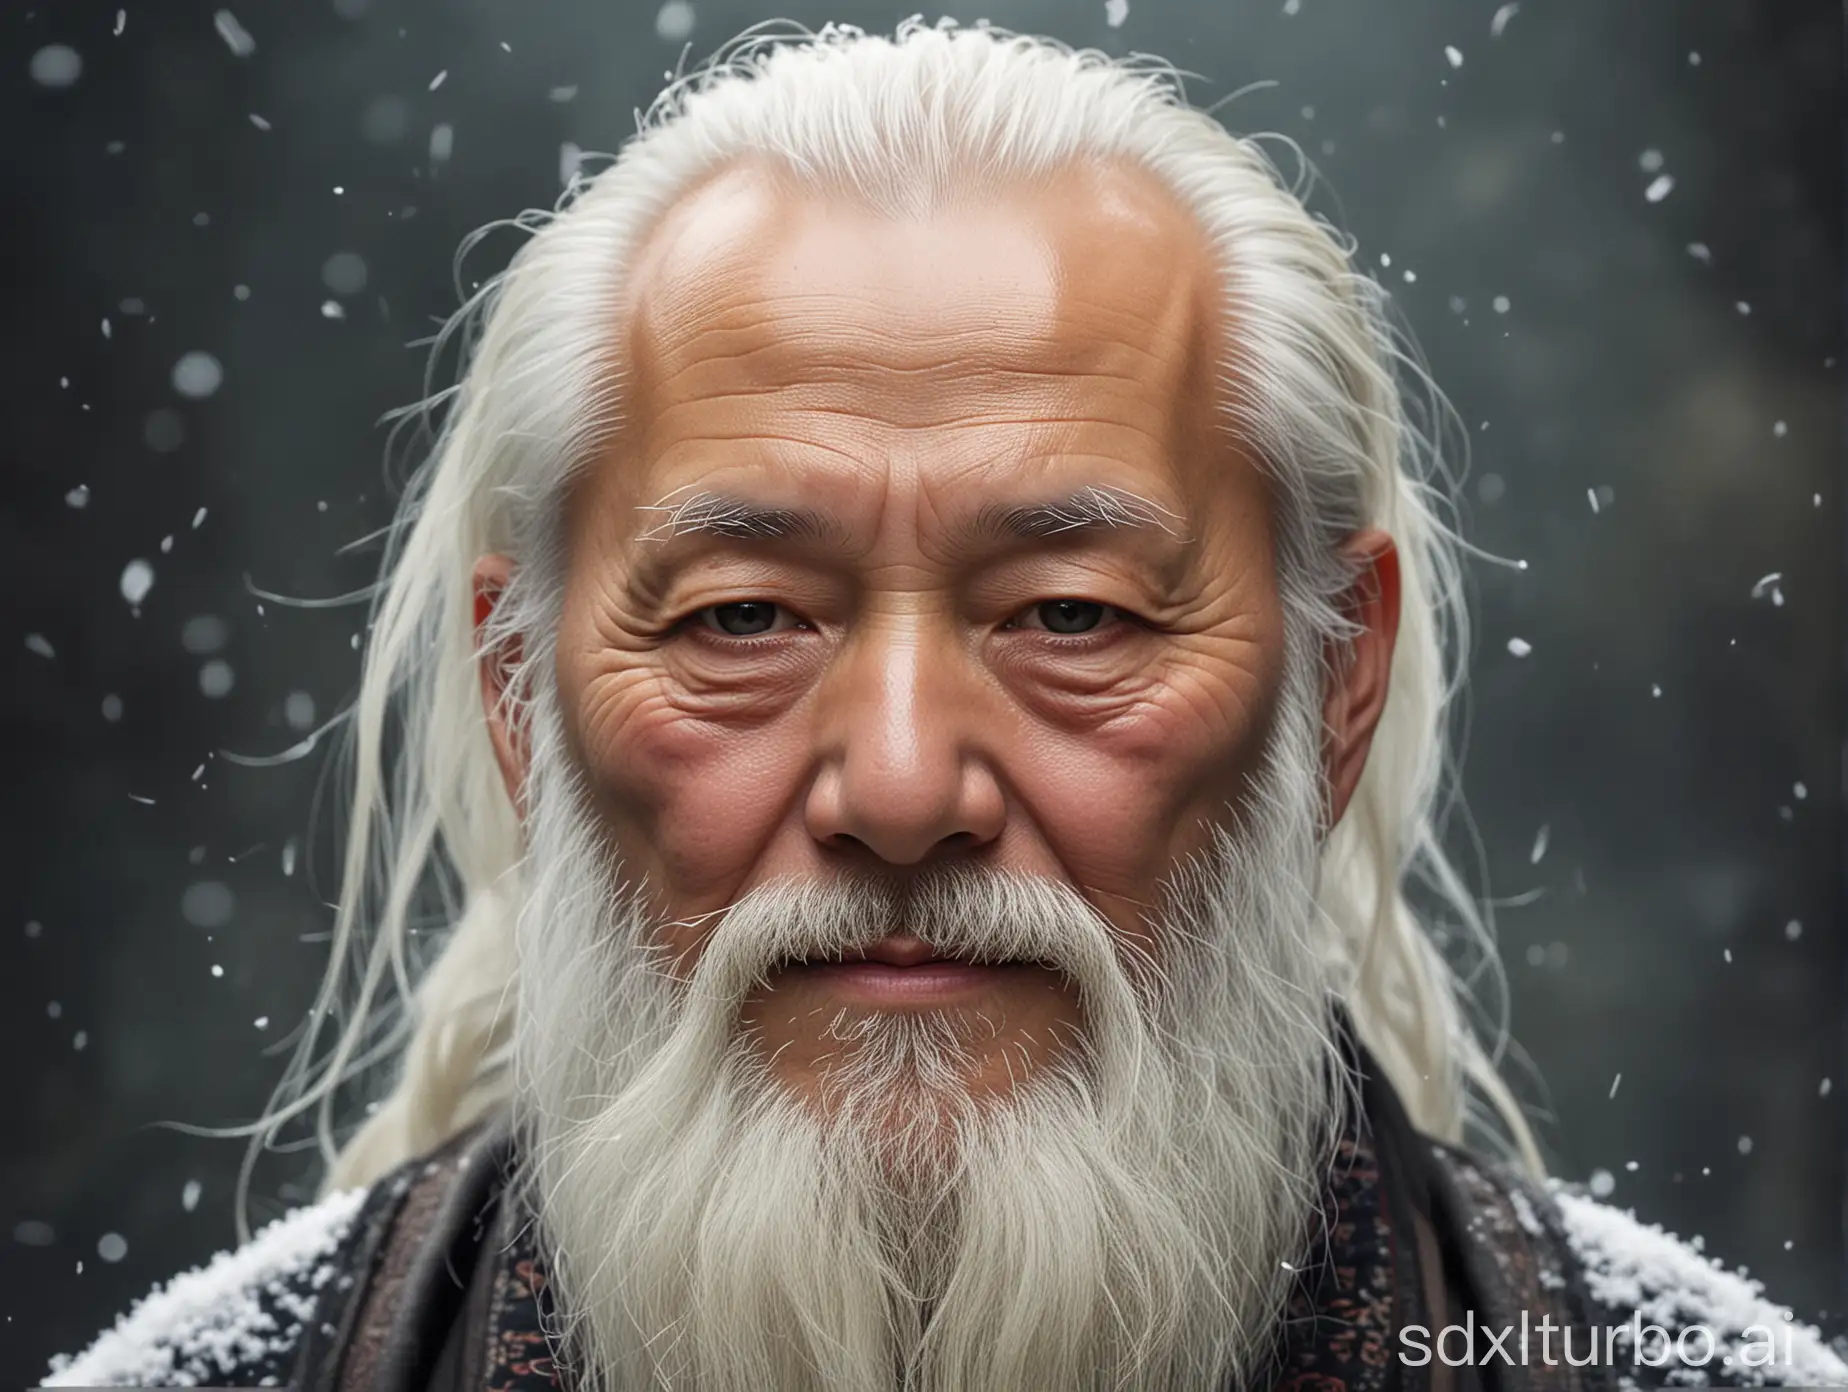 Wise-and-Amiable-WhiteBearded-Immortal-Legendary-Portrait-of-an-Old-Chinese-Man